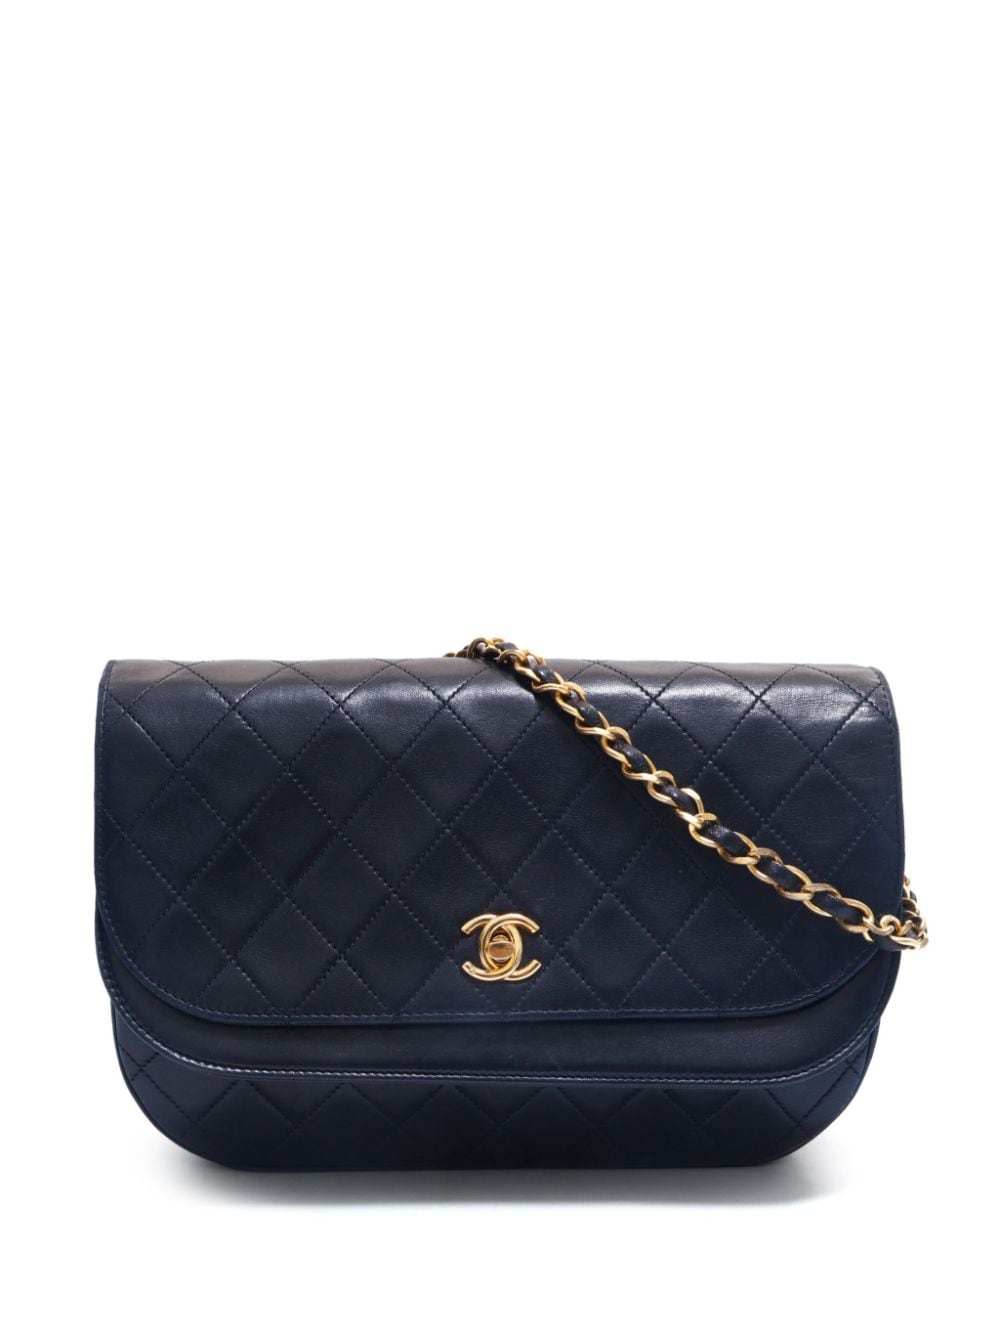 Image 1 of CHANEL Pre-Owned 1986-1988 diamond-quilted shoulder bag